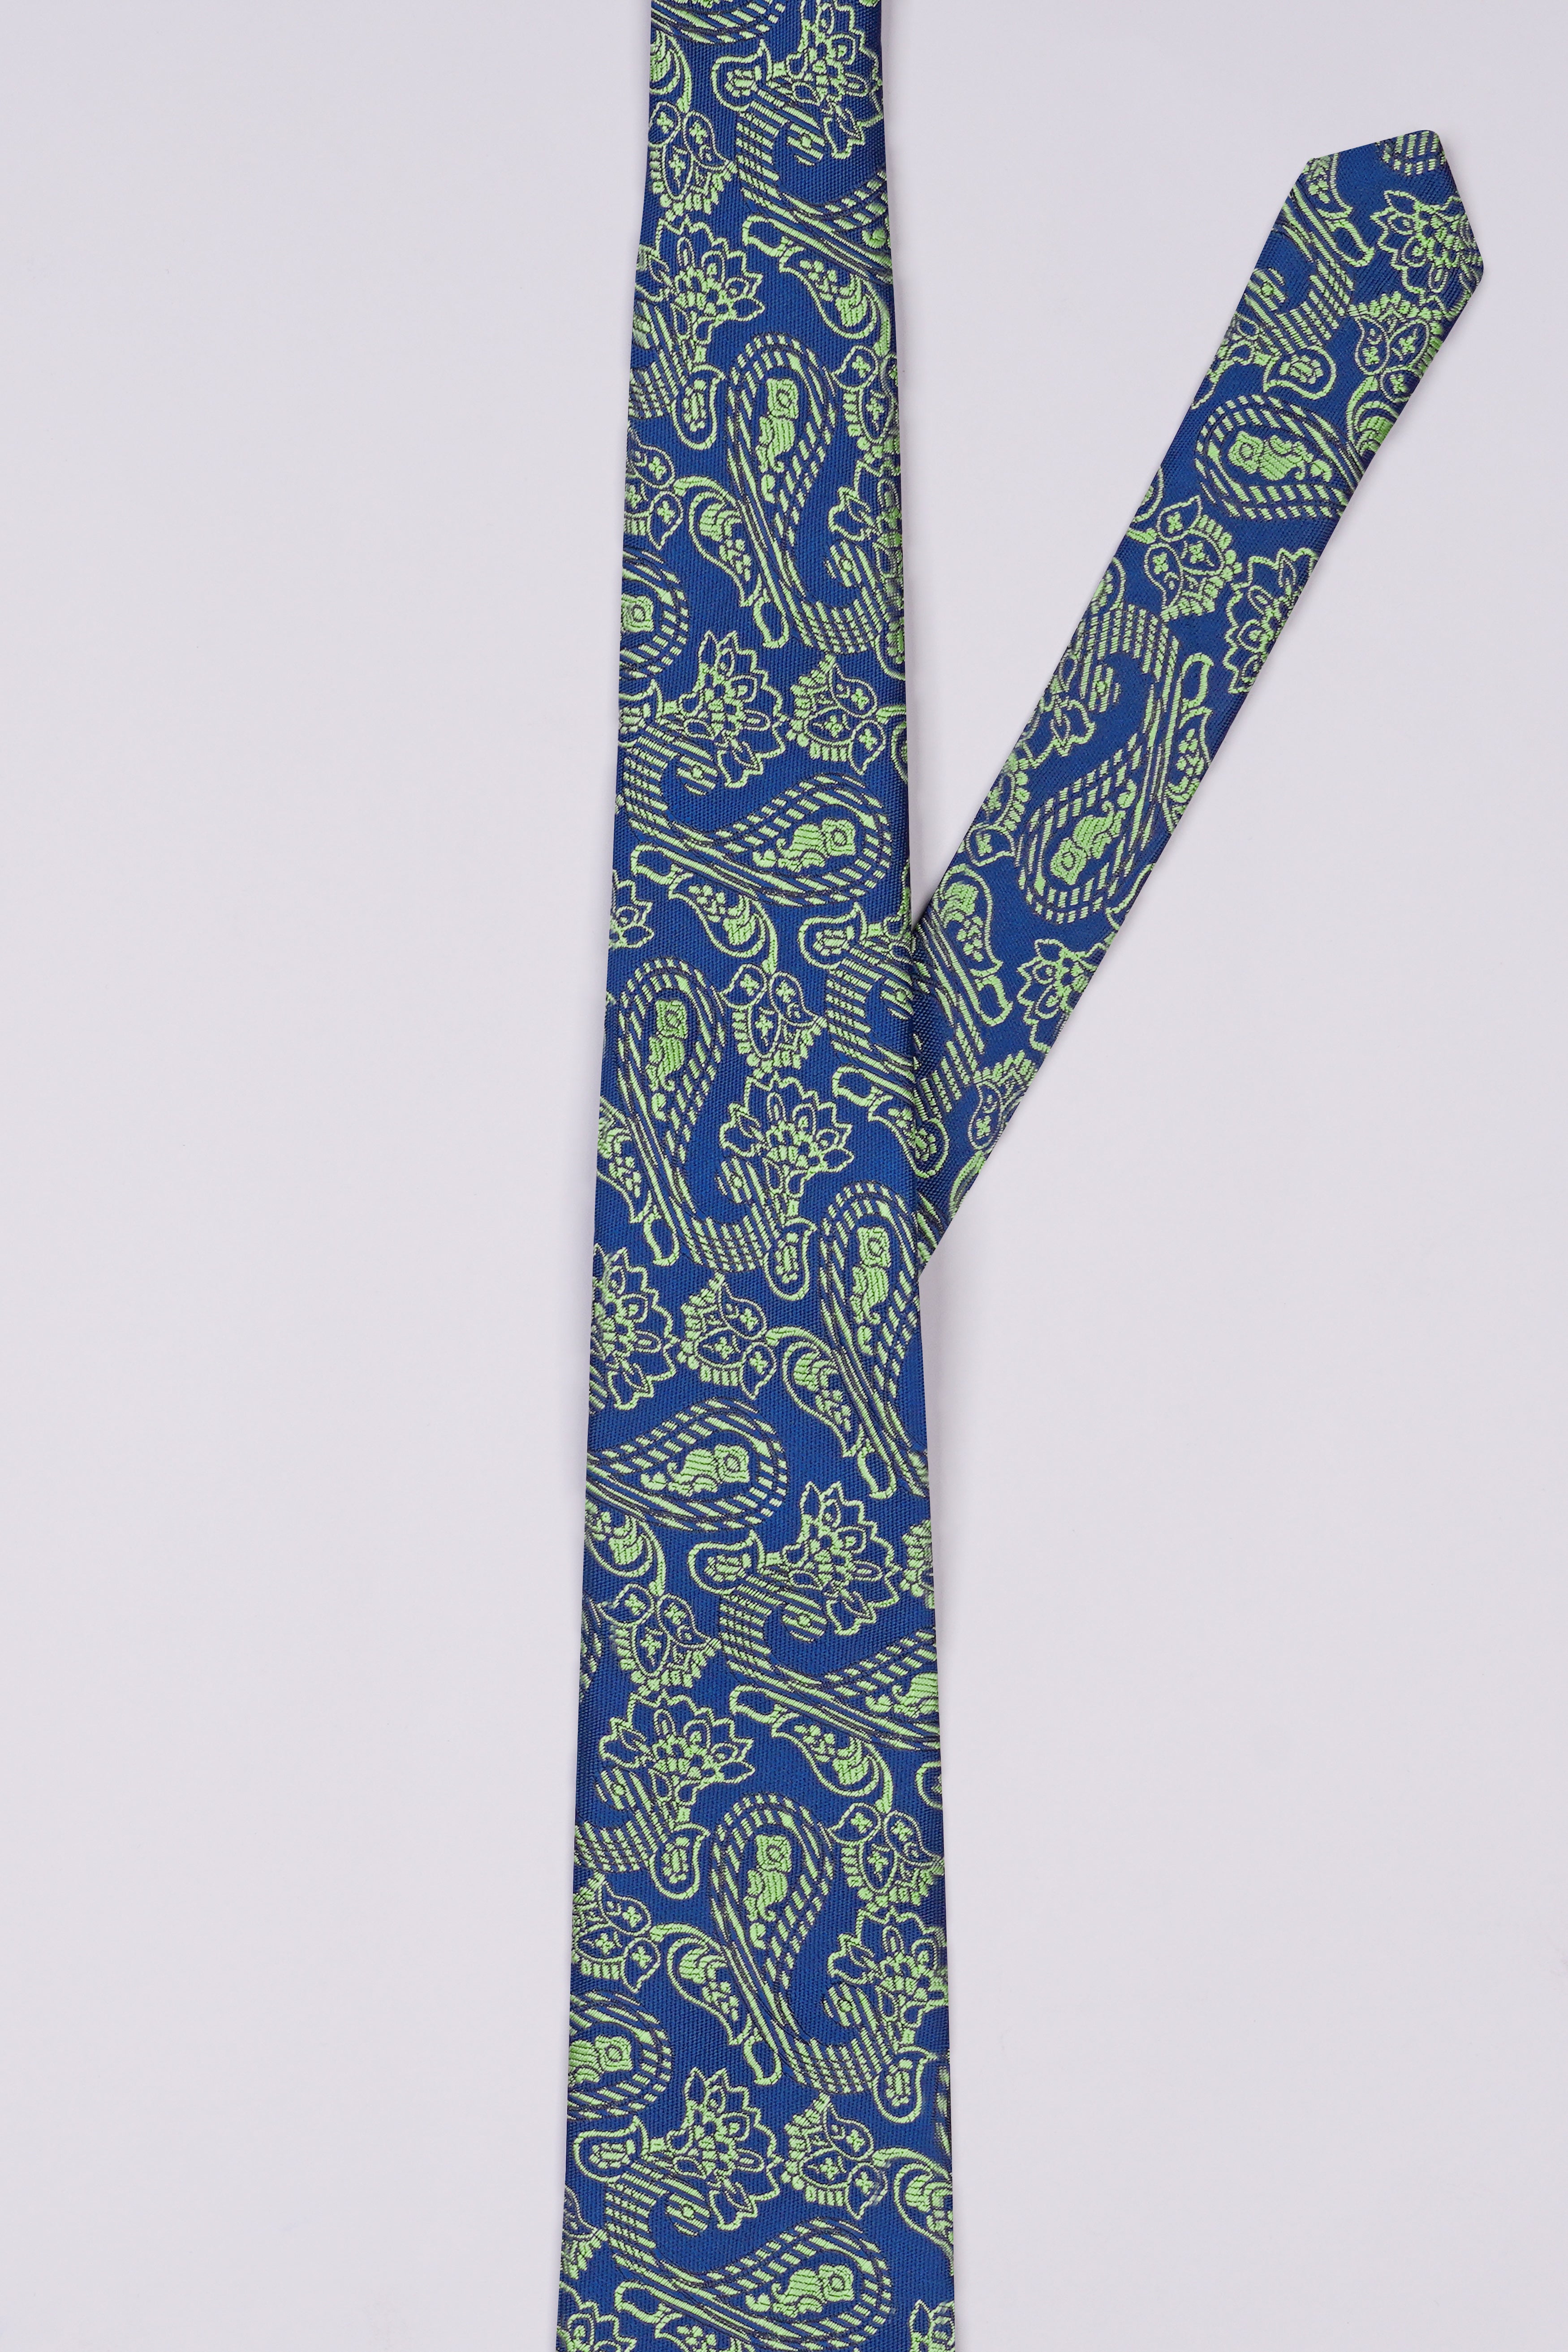 Astronaut Blue with Schist Green Paisley Jacquard Tie with Pocket Square TP062